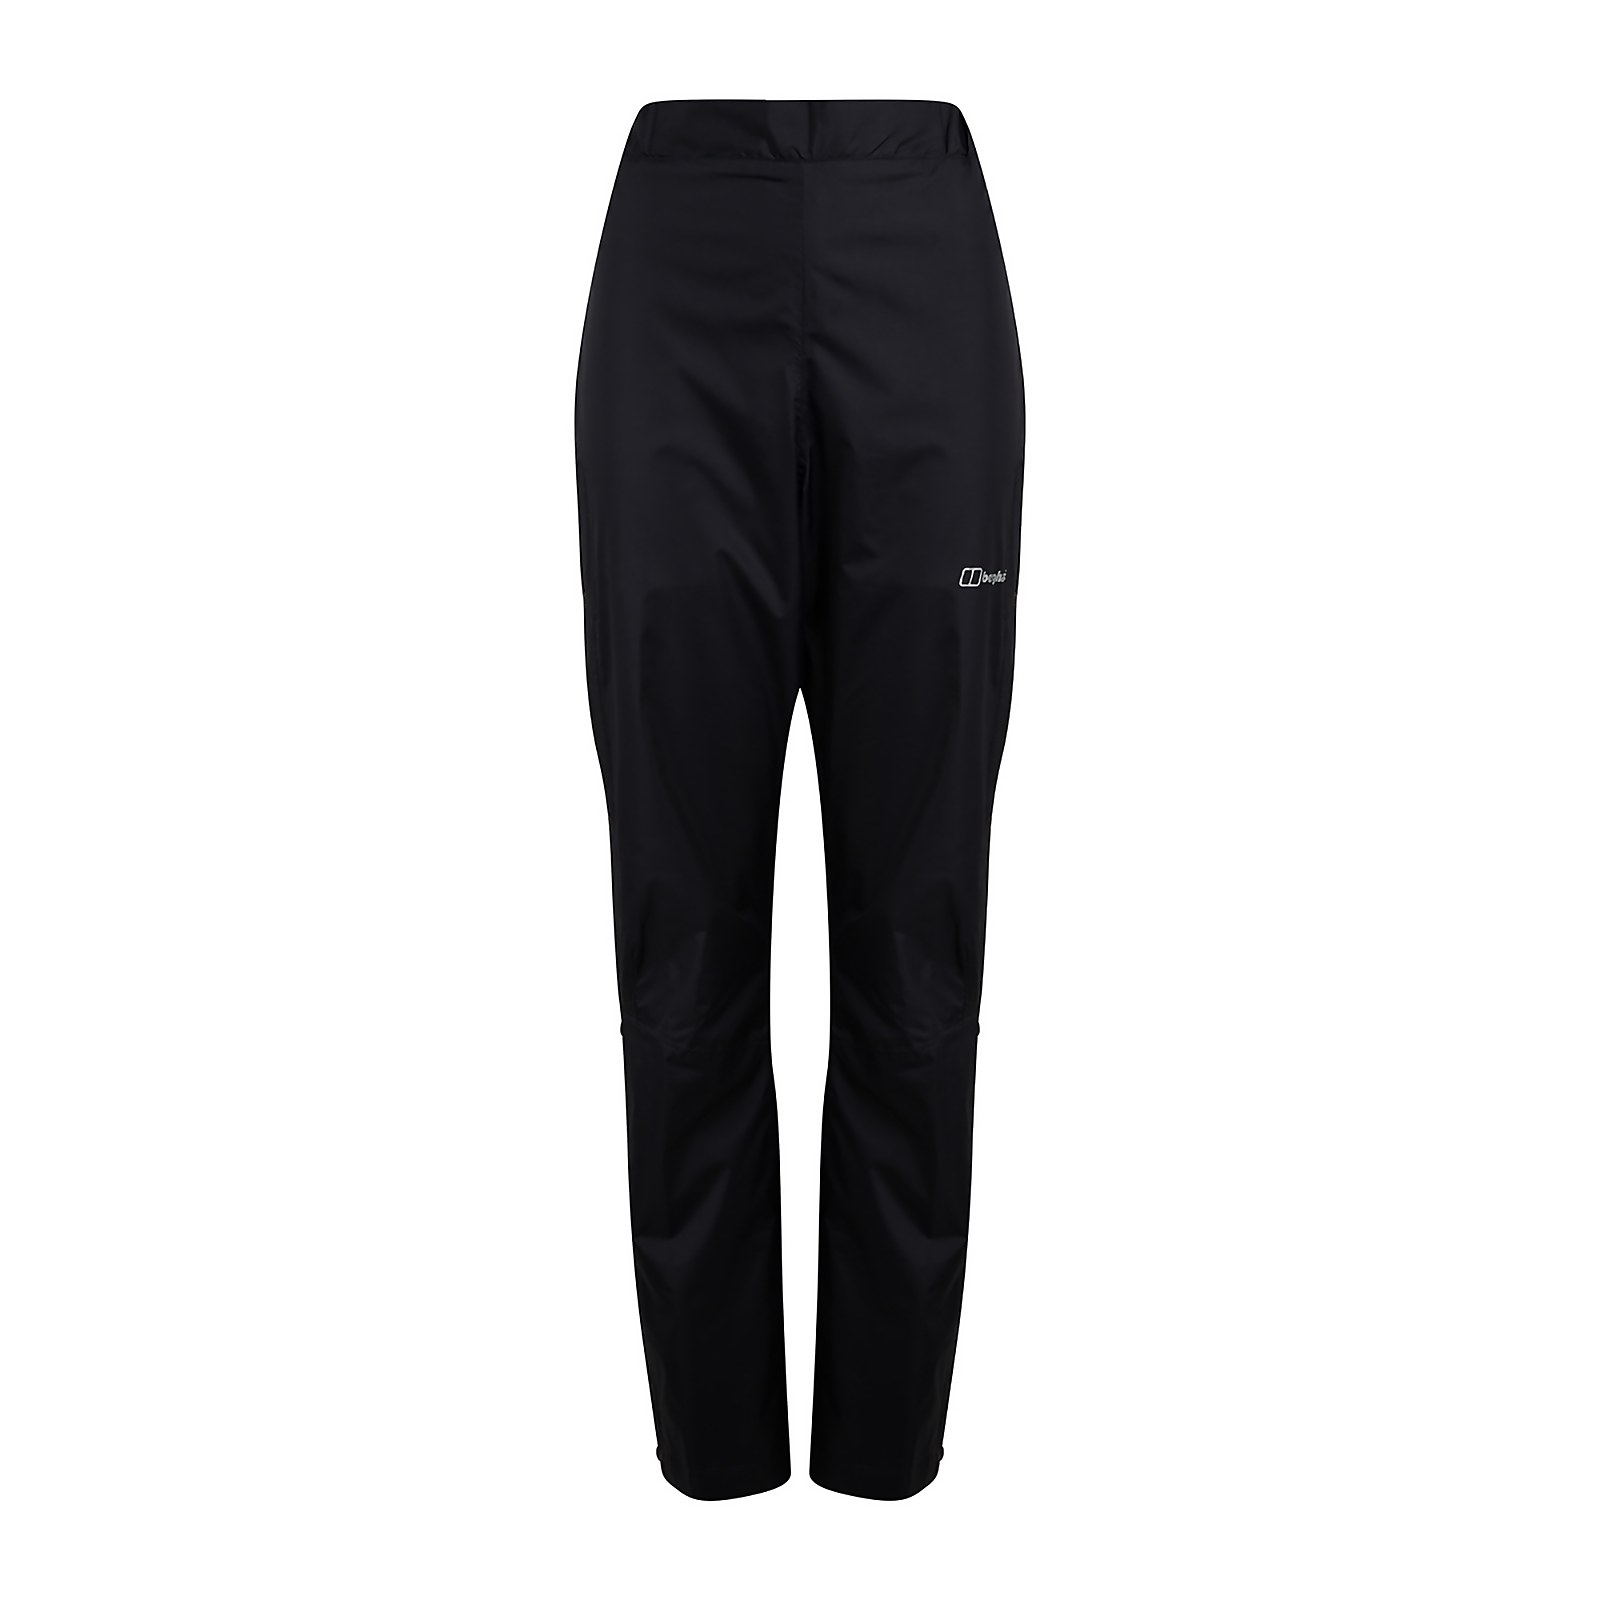 Berghaus Womens Deluge 2.0 Overtrousers - Black - 8    31